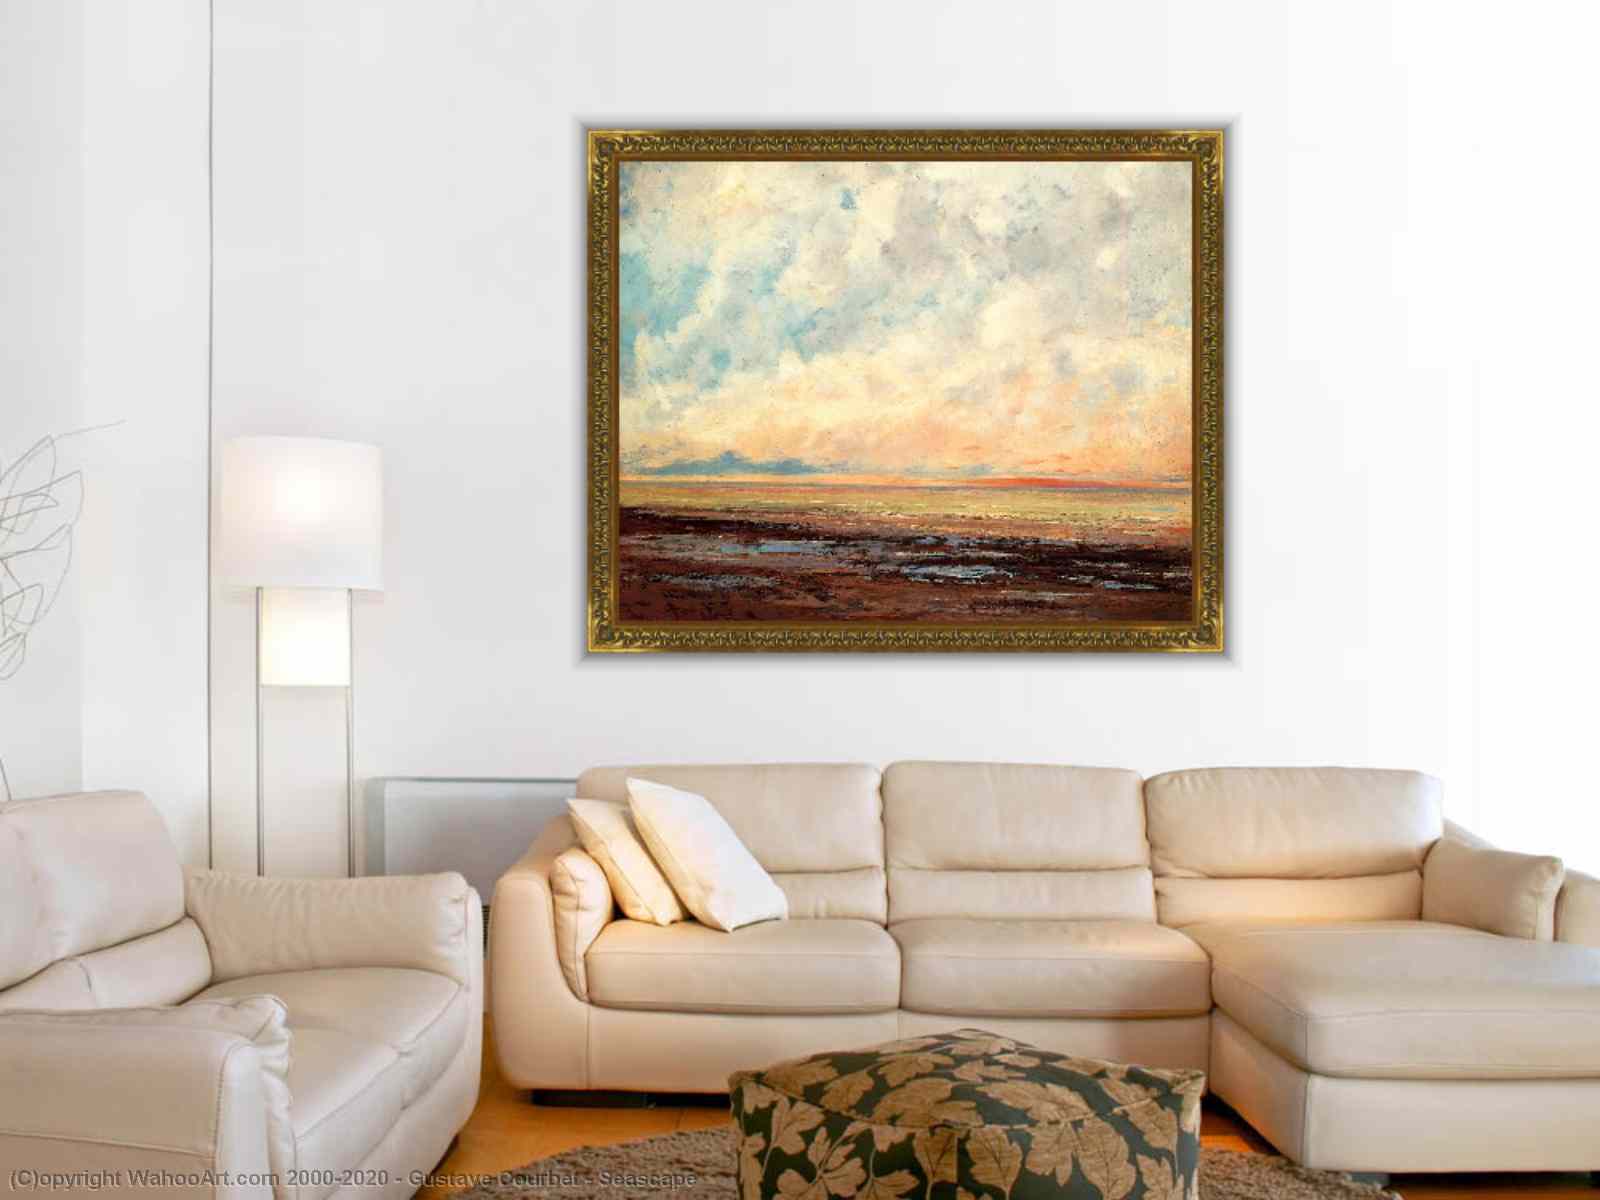 L'Immensite - Gustave Courbet as art print or hand painted oil.